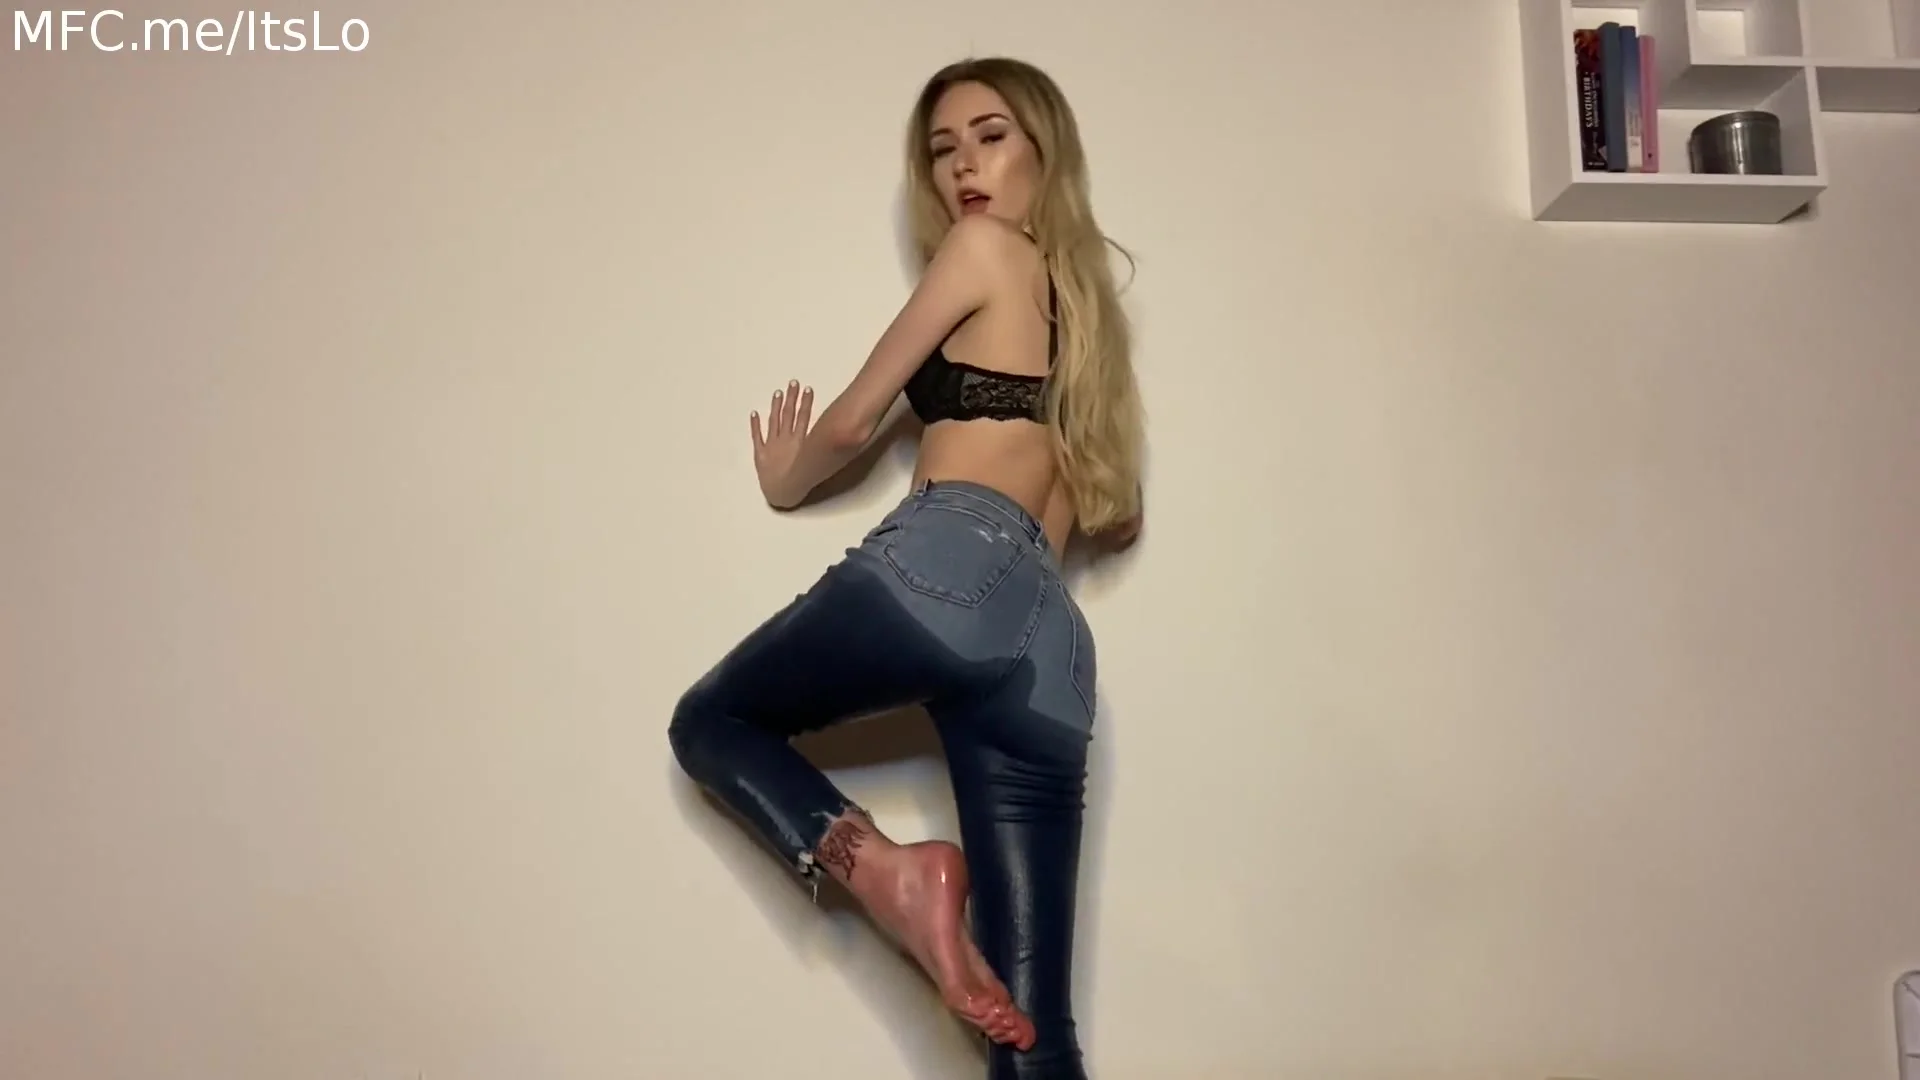 Wetting Her Jeans